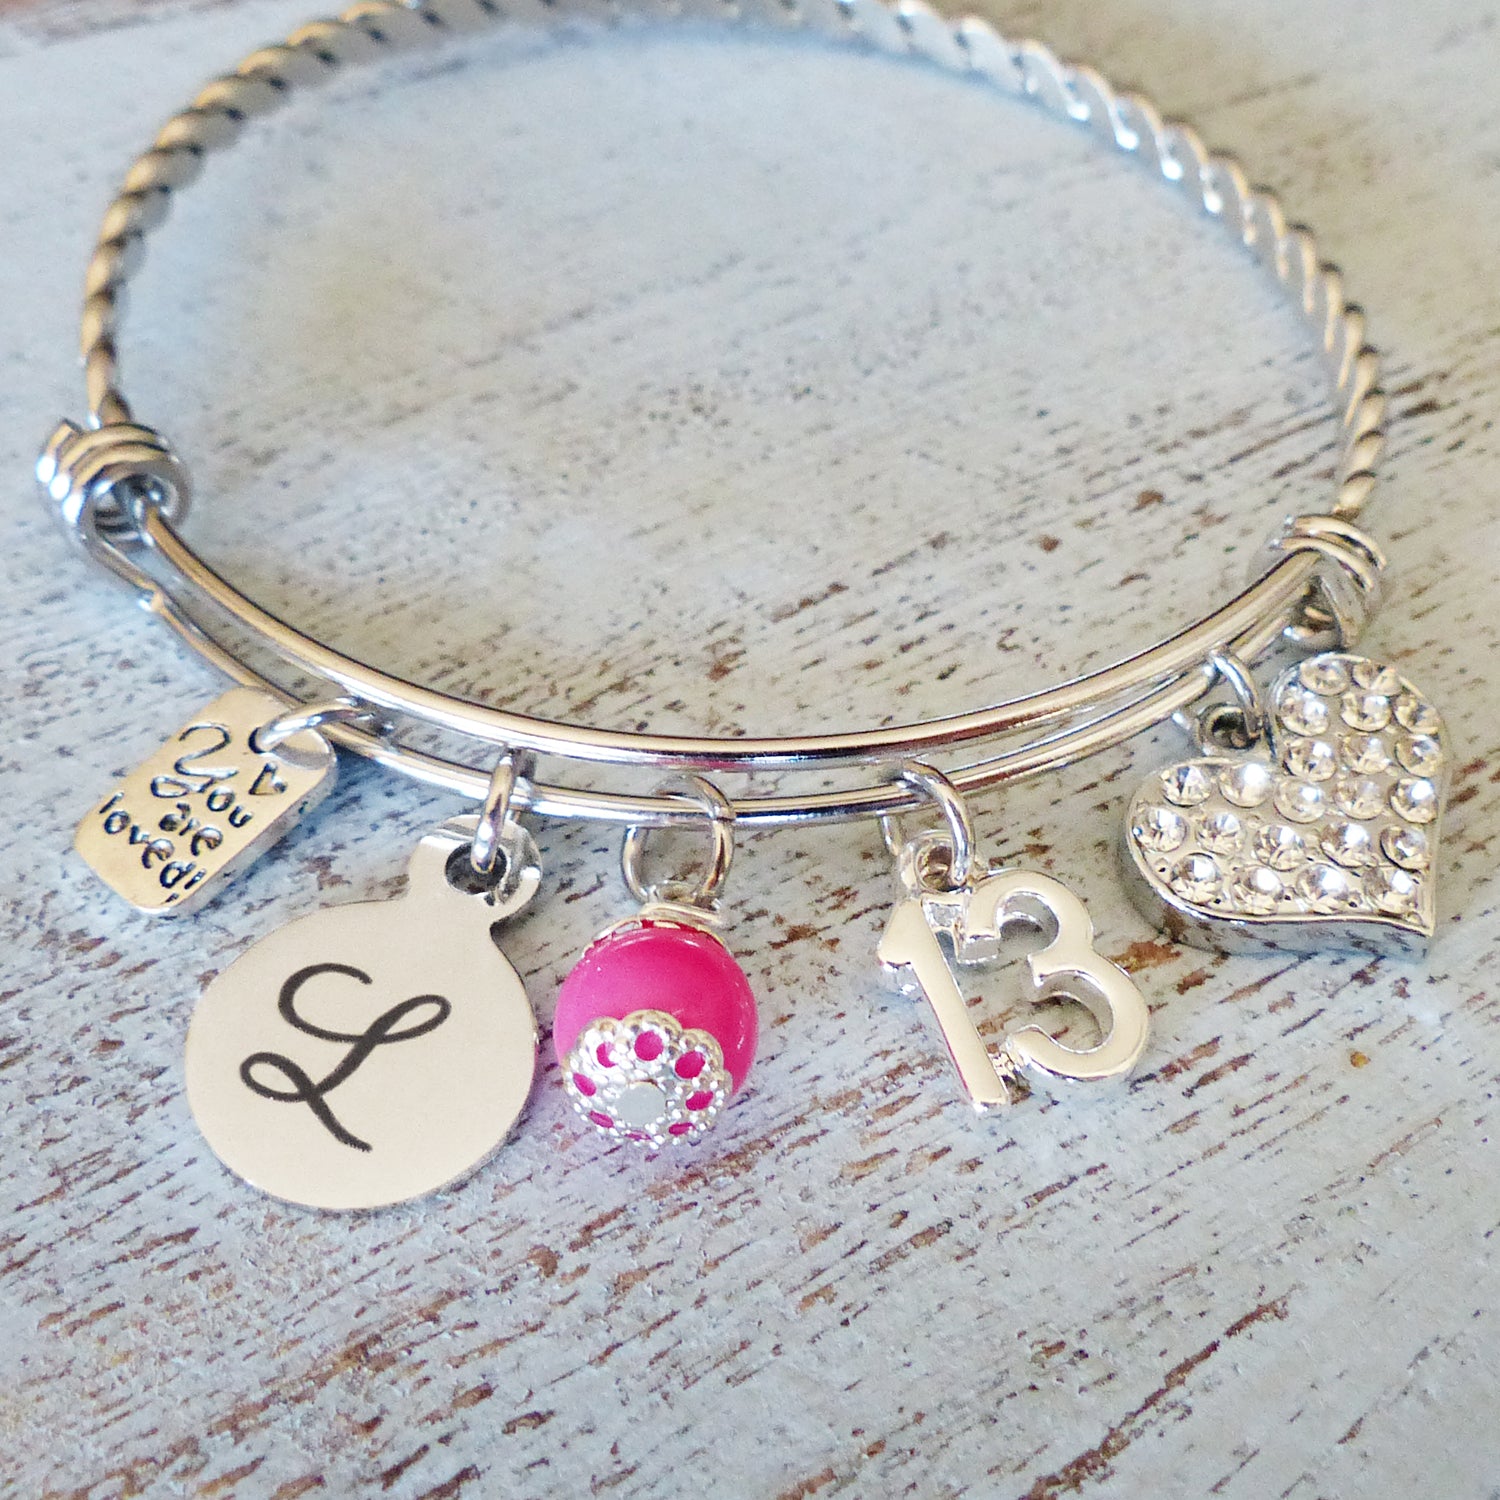 13 year old personalized bangle bracelet with heart and you are loved charms. Custom letter